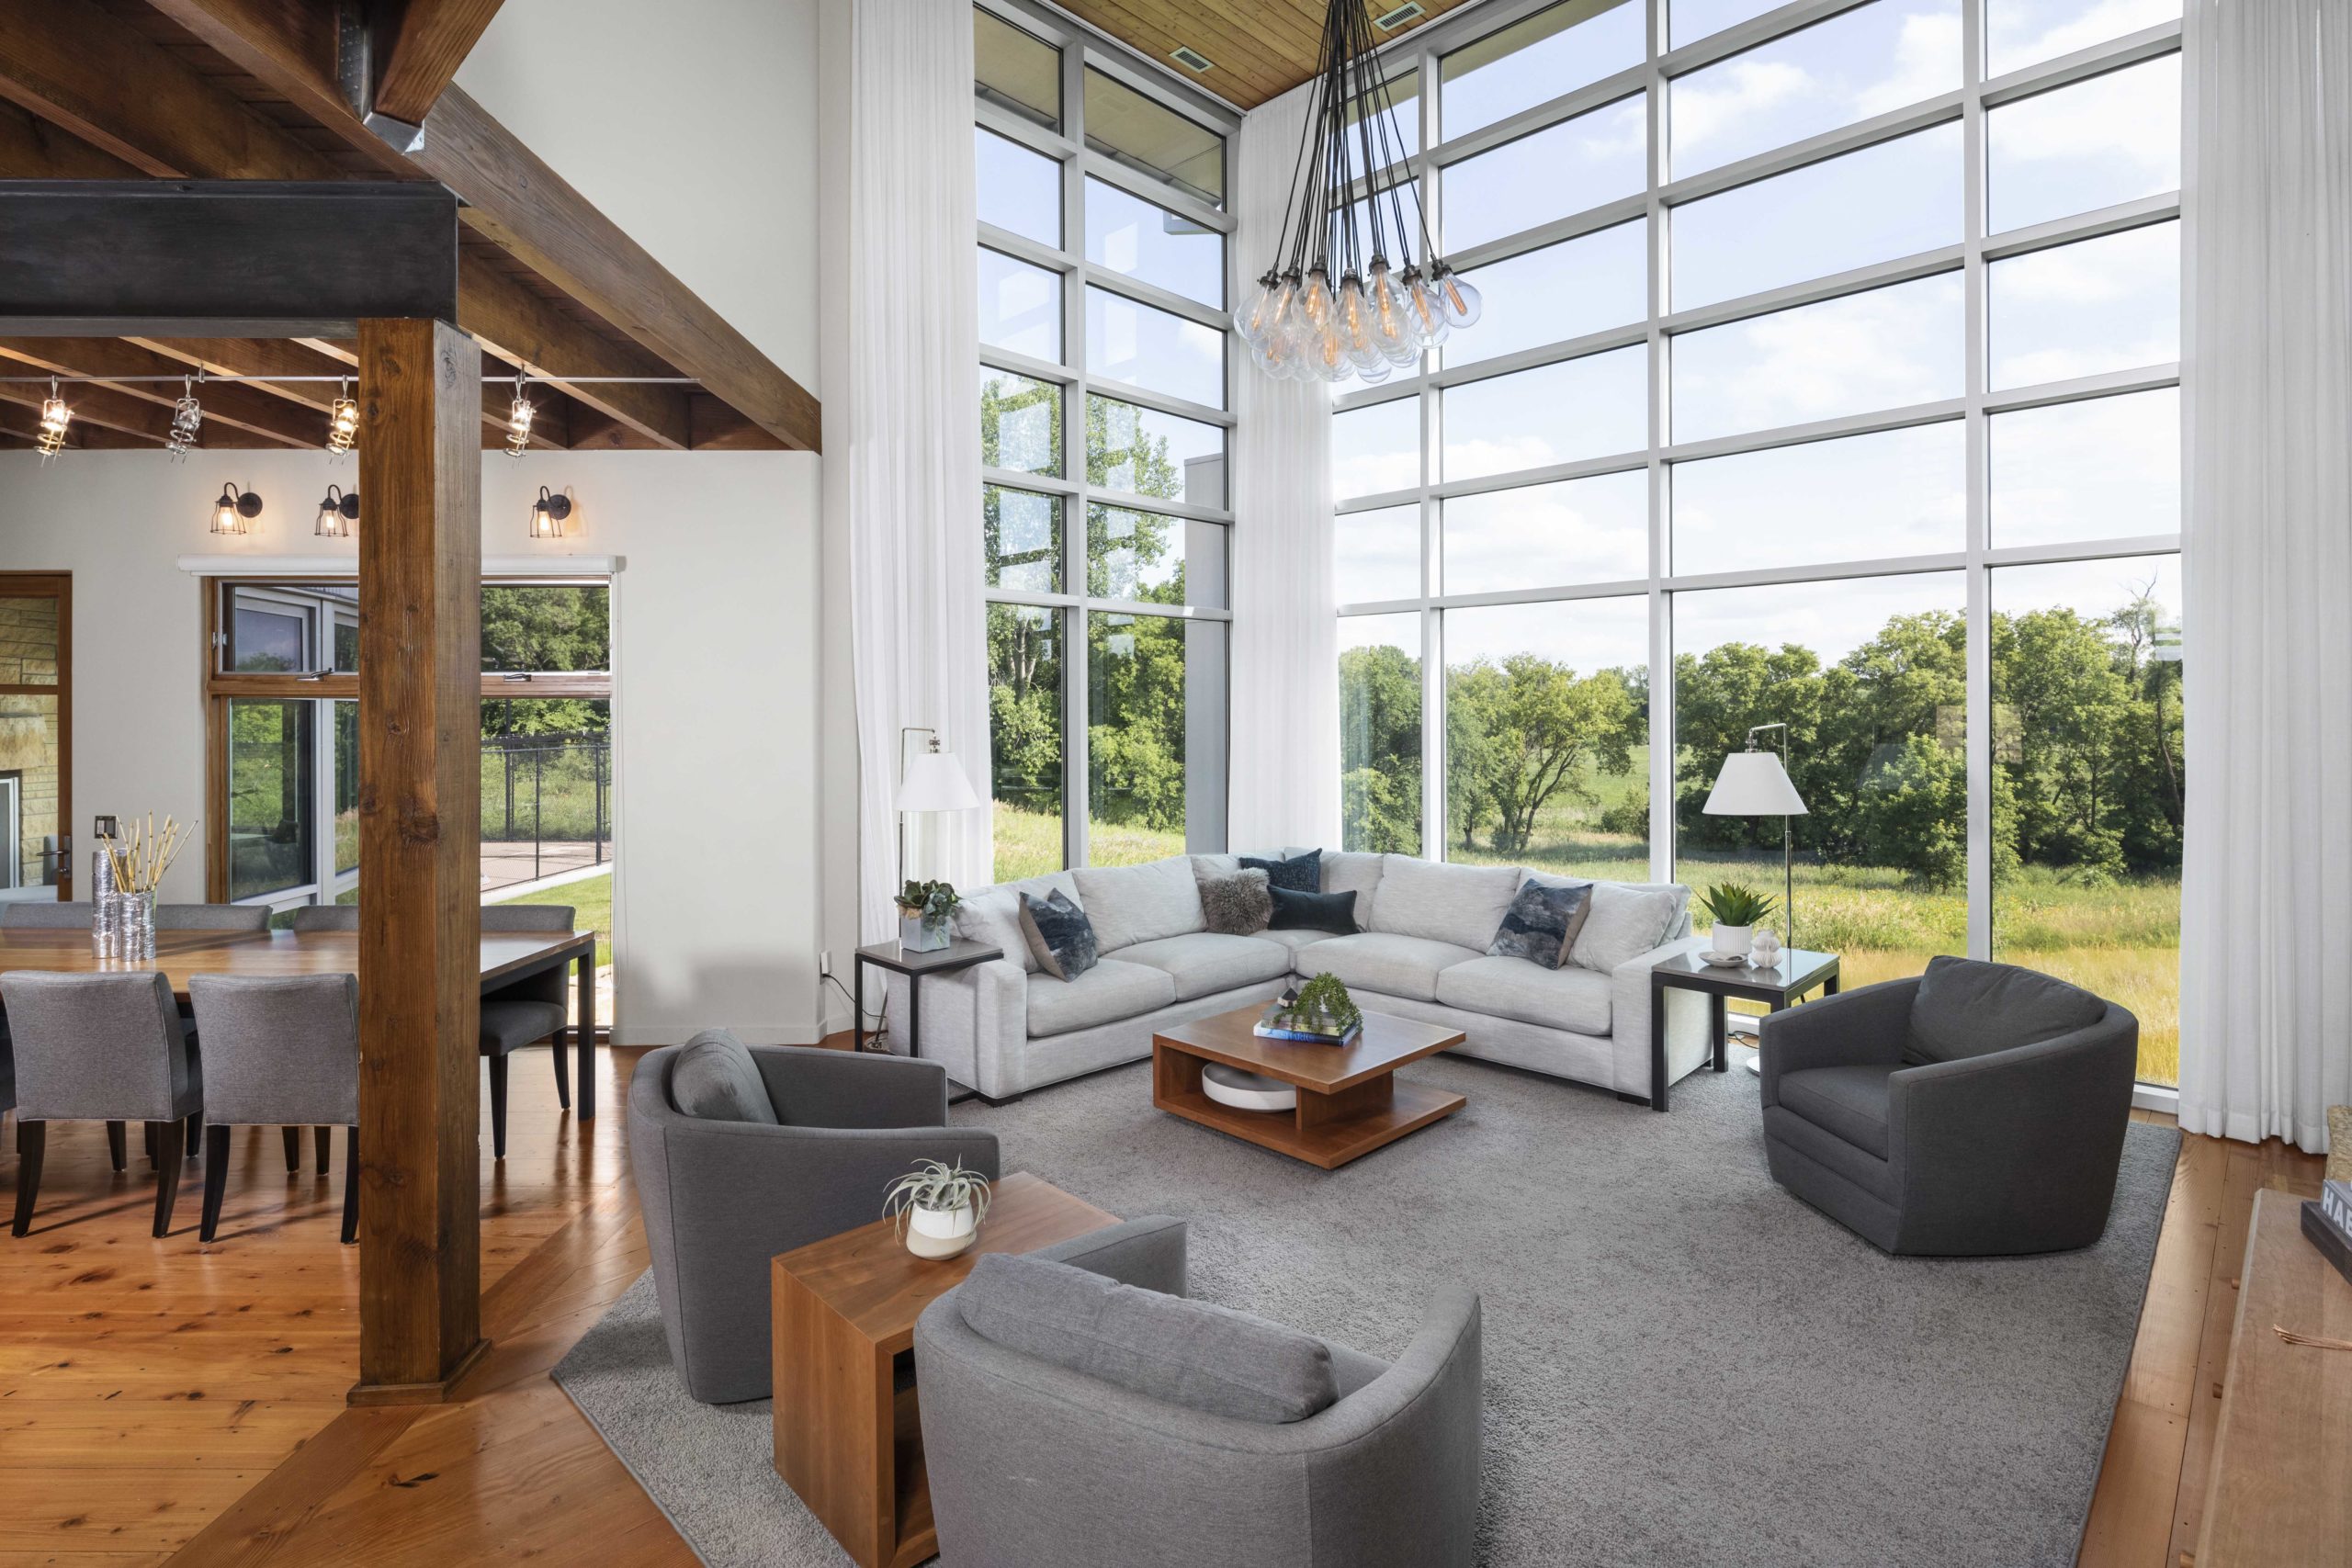 A contemporary living room with large windows overlooking a field.